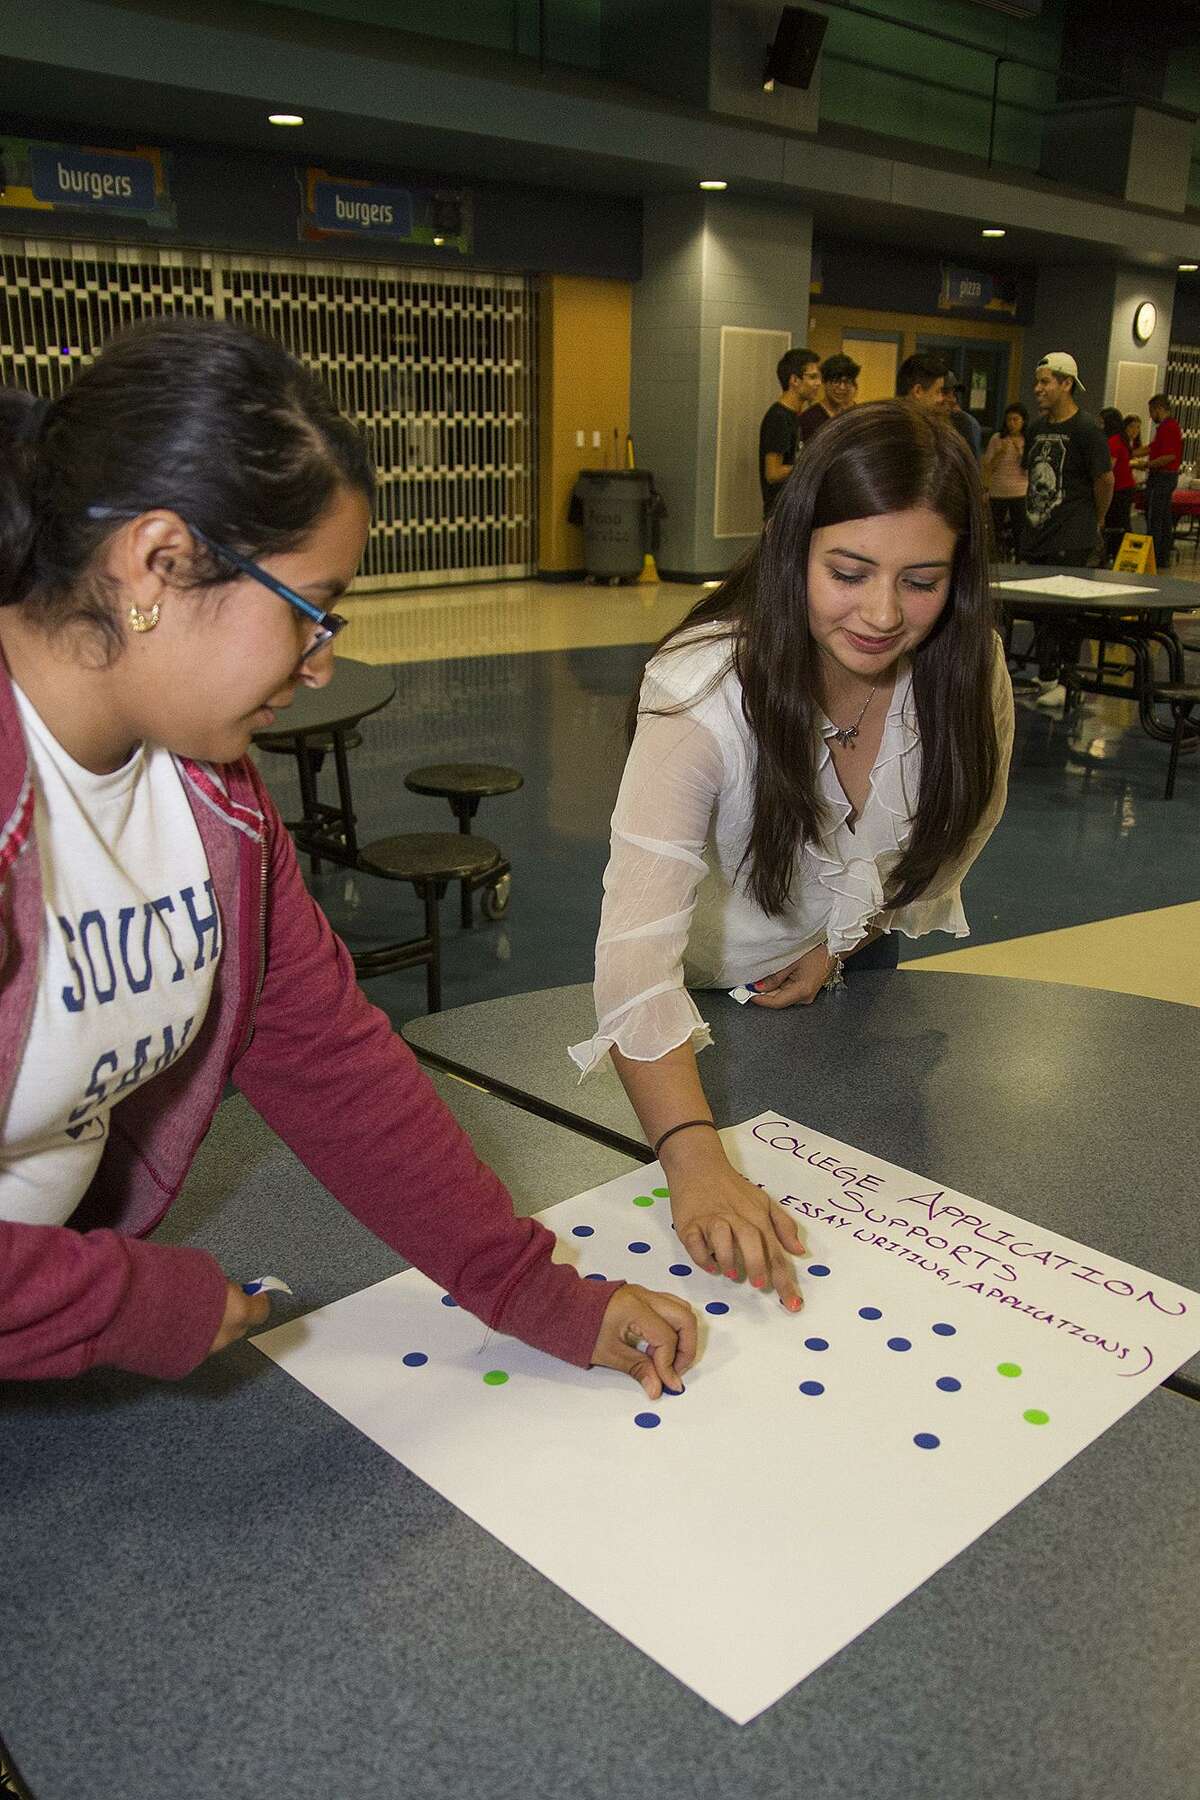 Paola Galvan (left), 17, and Claudia Medellin, 17, use one of their three votes for college application support Tuesday at South San Antonio High School. Communities in Schools used the announcement to get input from students and parents on what areas to focus on by having them vote on these large sheets of paper.